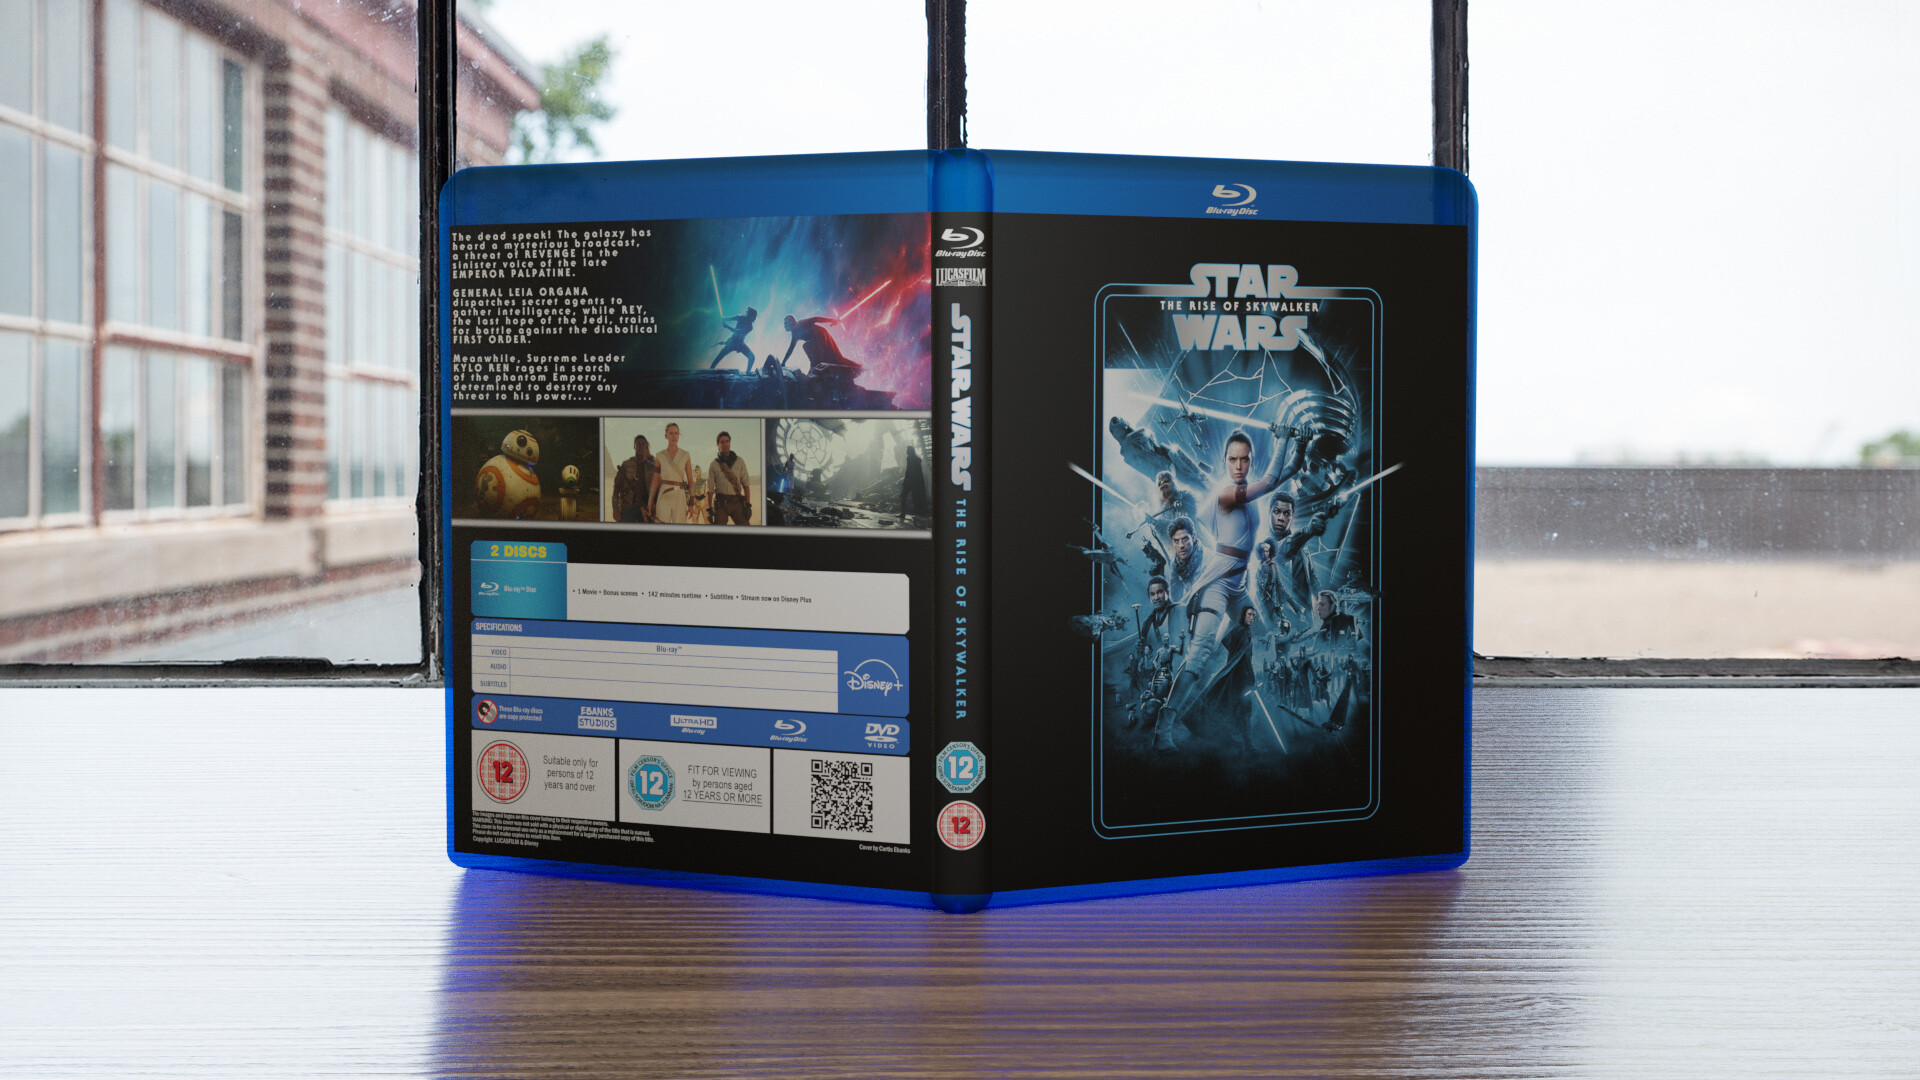 ArtStation - Complete Star Wars Blu-ray Cover Collection (Aug 2022)